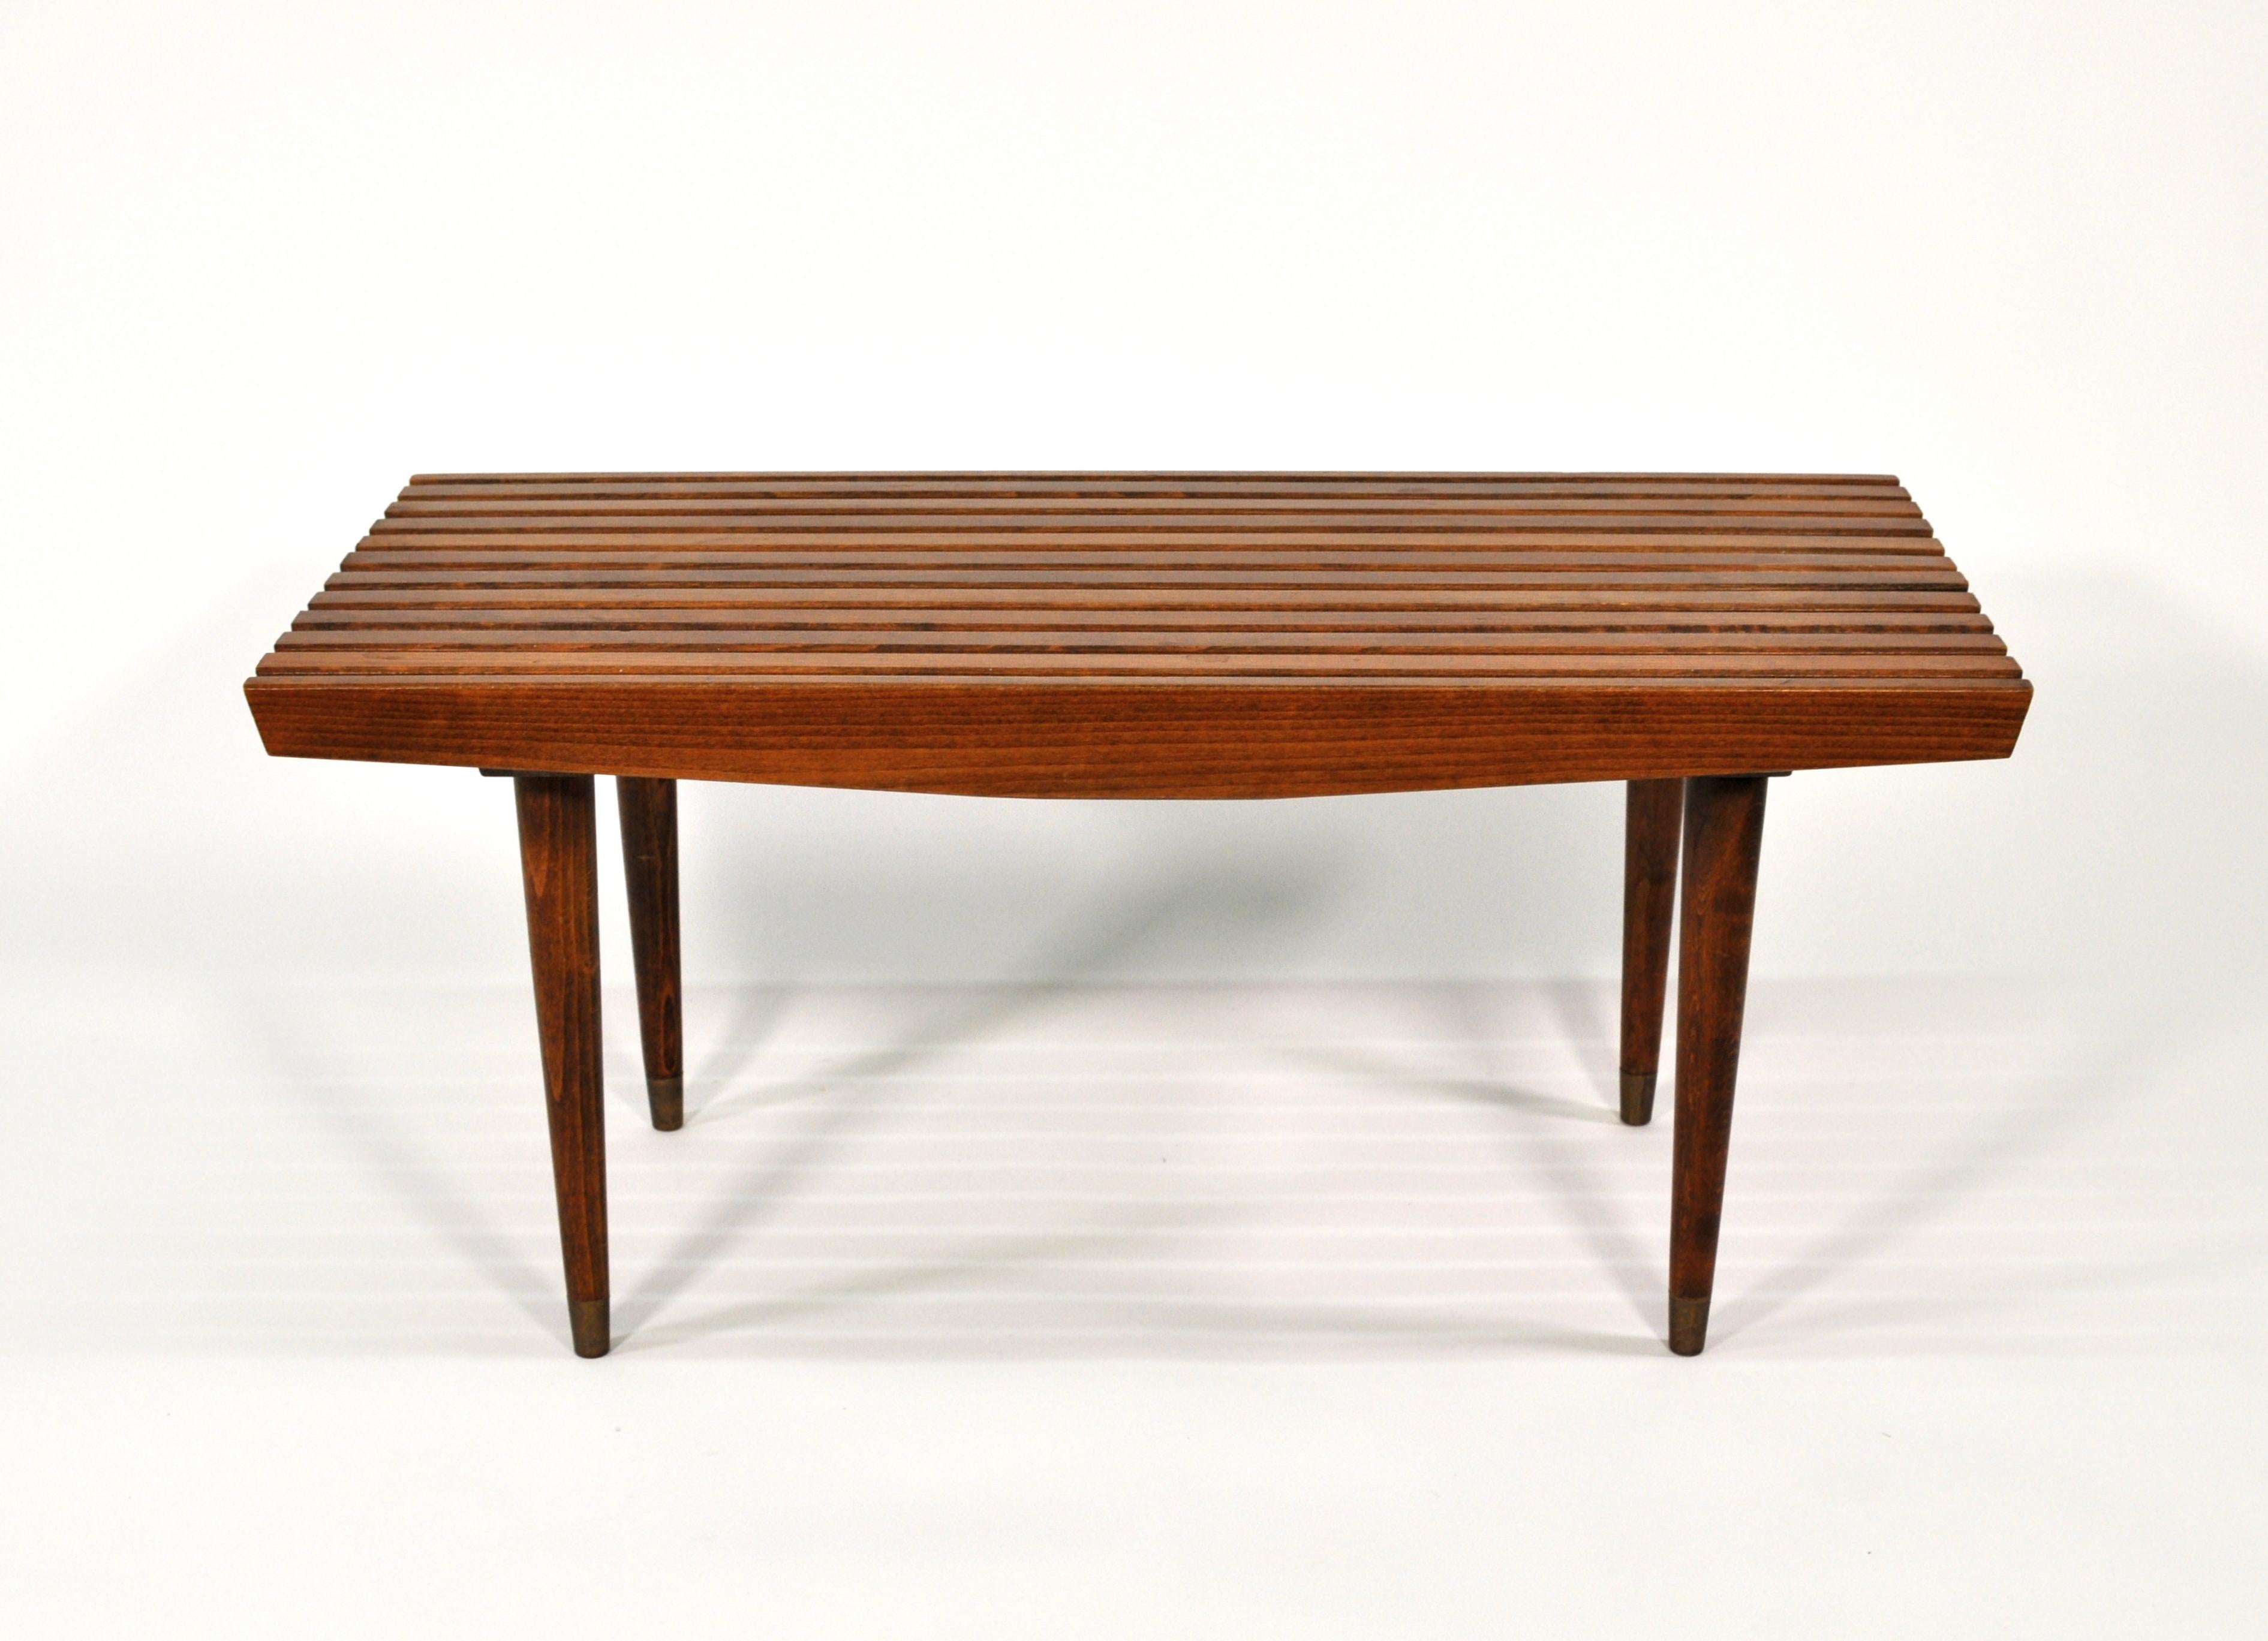 A midcentury slatted wood bench or coffee table, dating from the 1960s. The vintage bench features long and slender tapered legs. It can be used virtually anywhere: as a cocktail or sofa table, at the foot of a bed, under a window, in an entrance